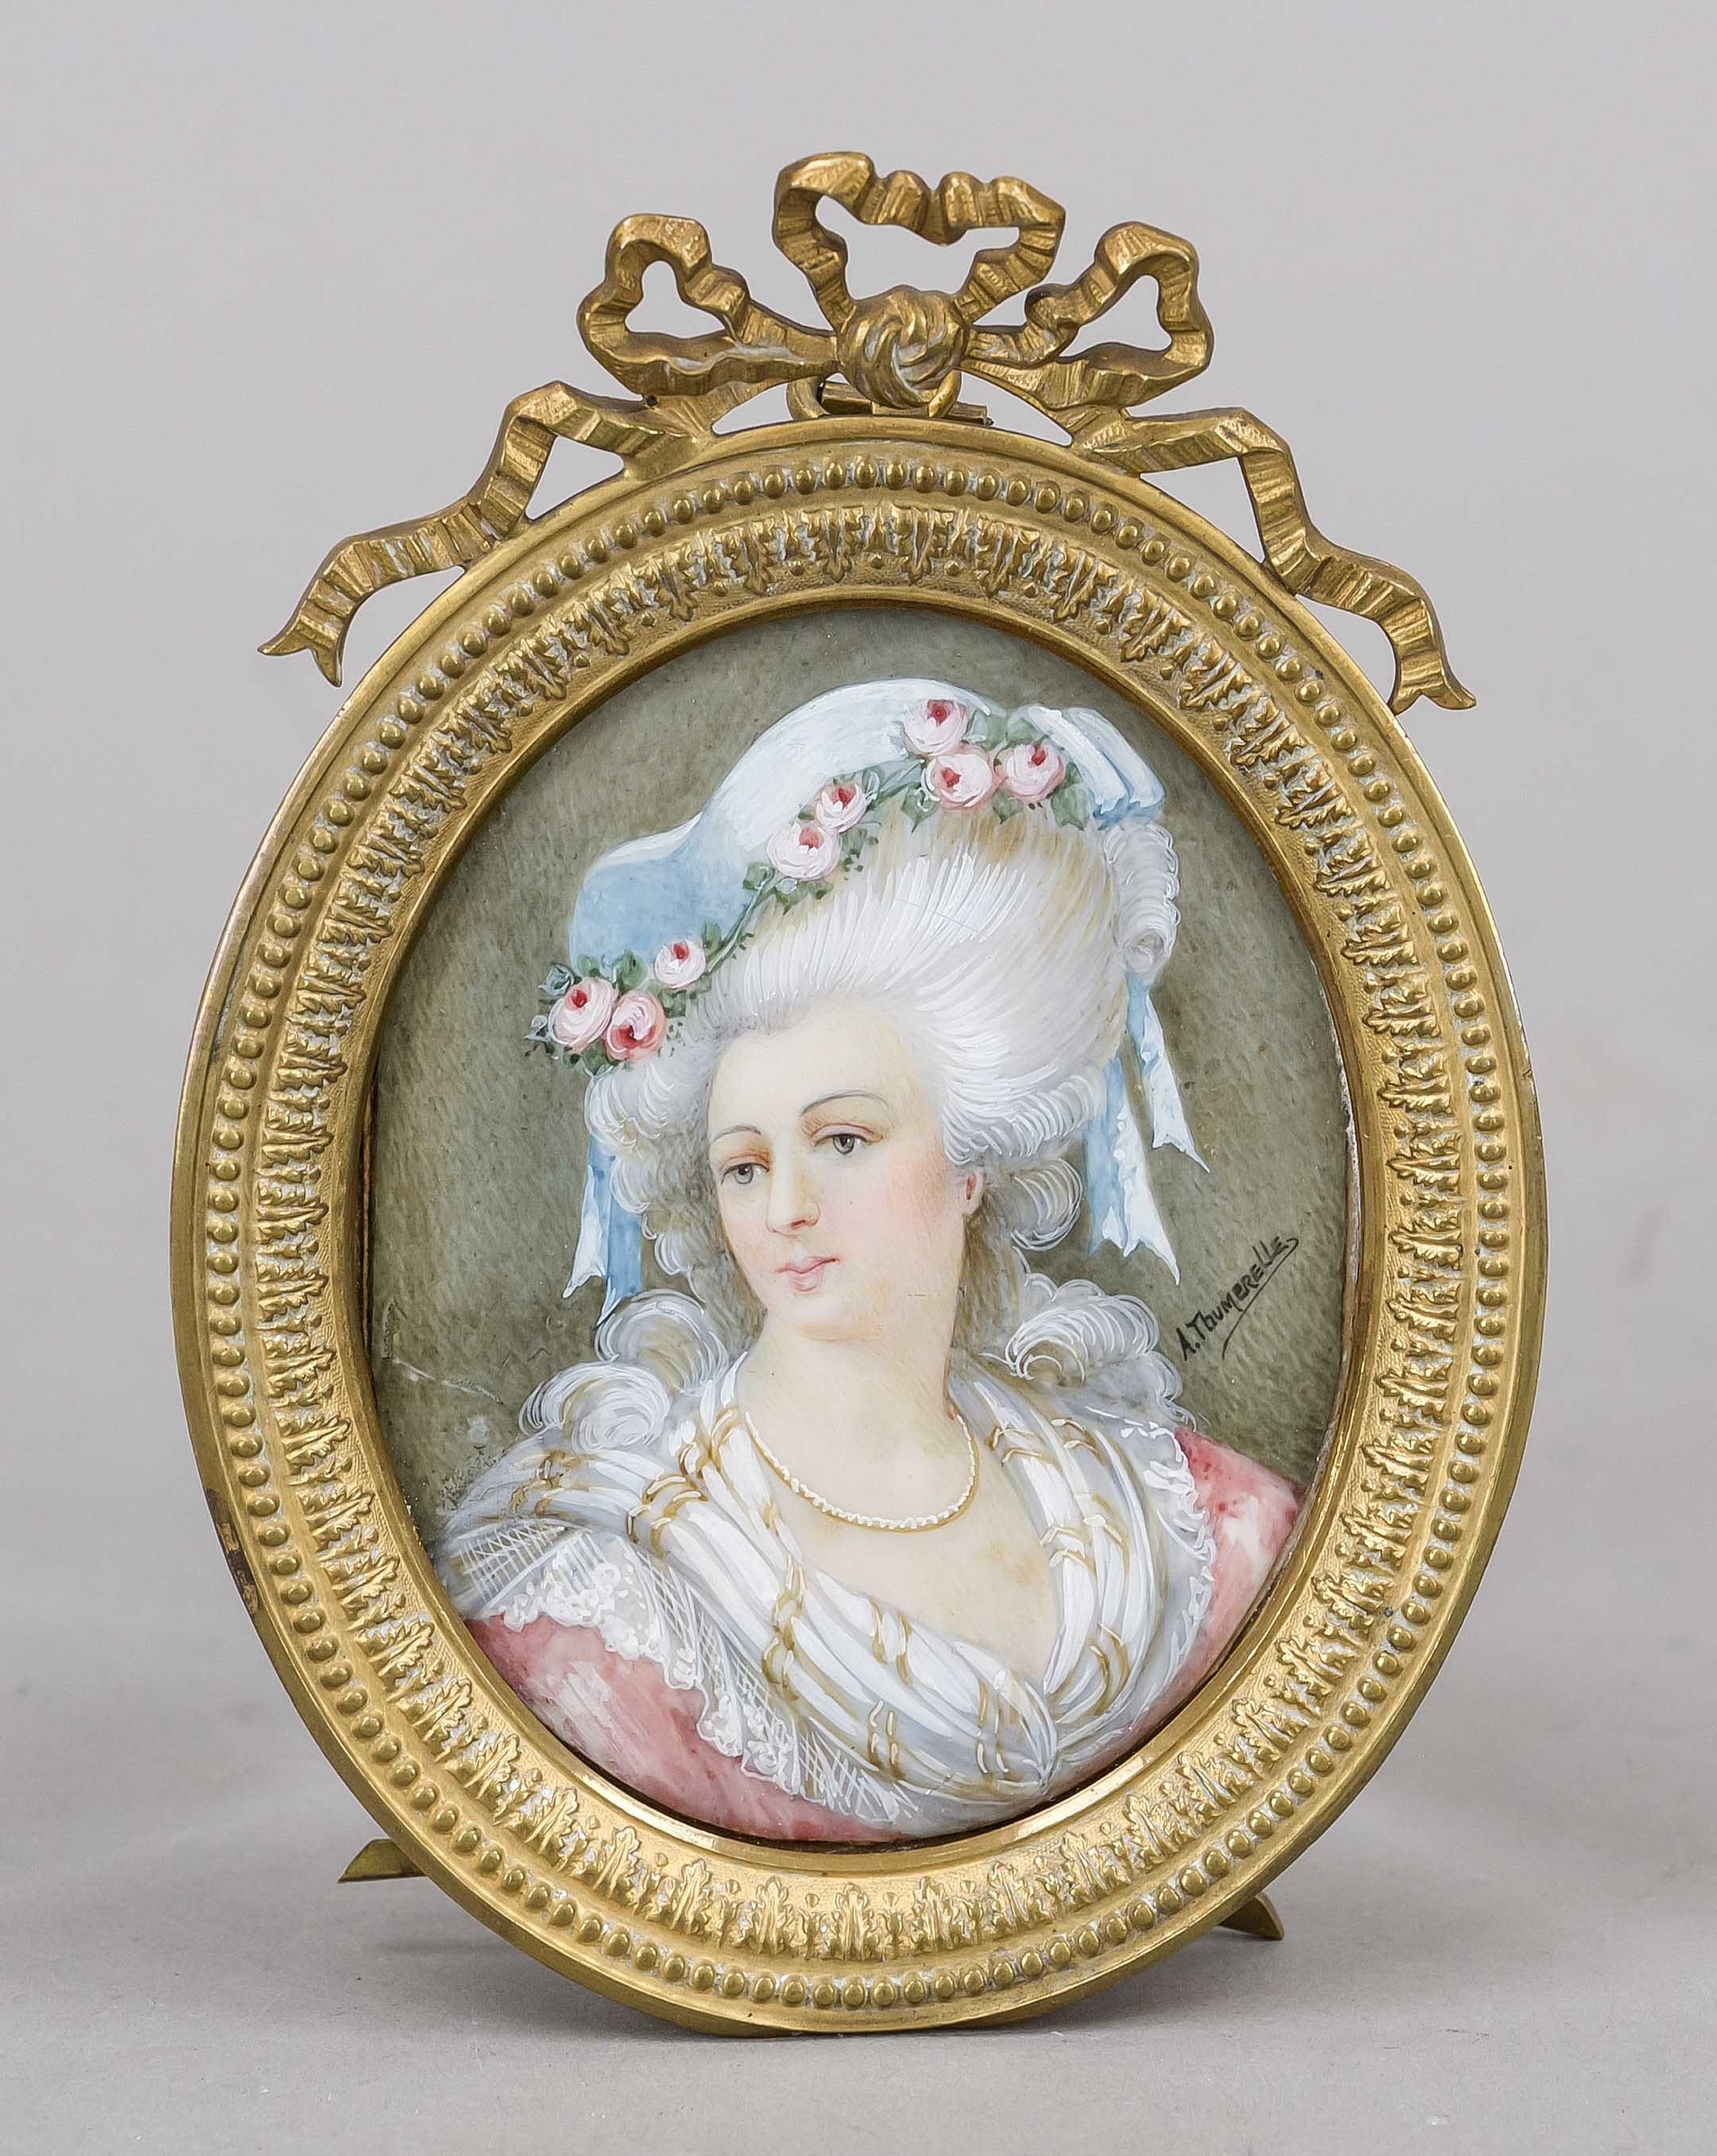 Miniature, France, 19th century, polychrome tempera painting on bone plate, unopened, oval